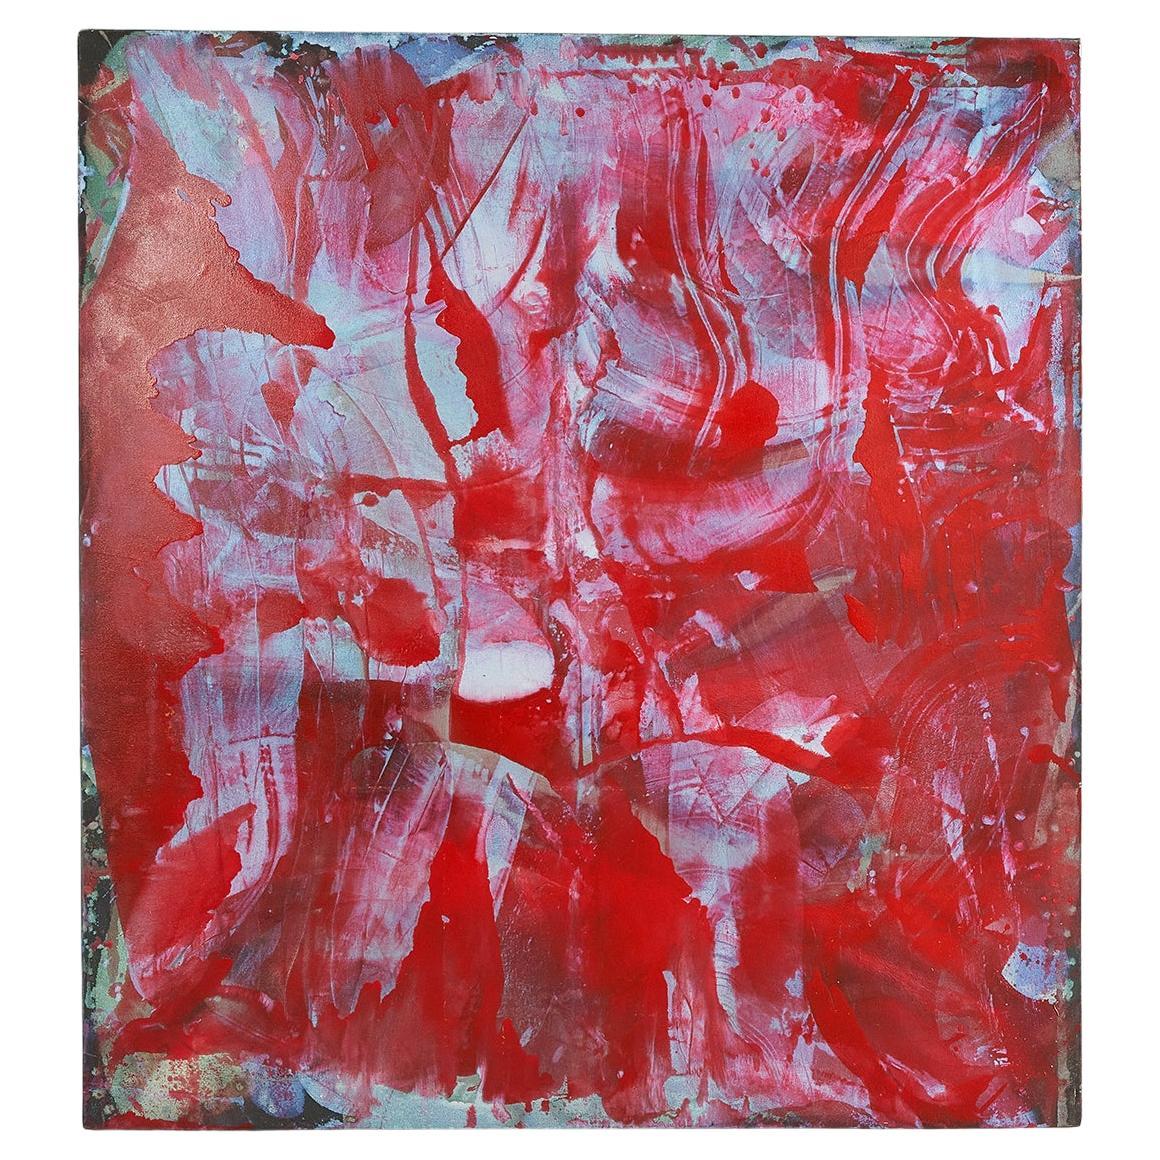 Large Red and Blue Abstract Painting "Temporary Ephedrine" by John Link For Sale